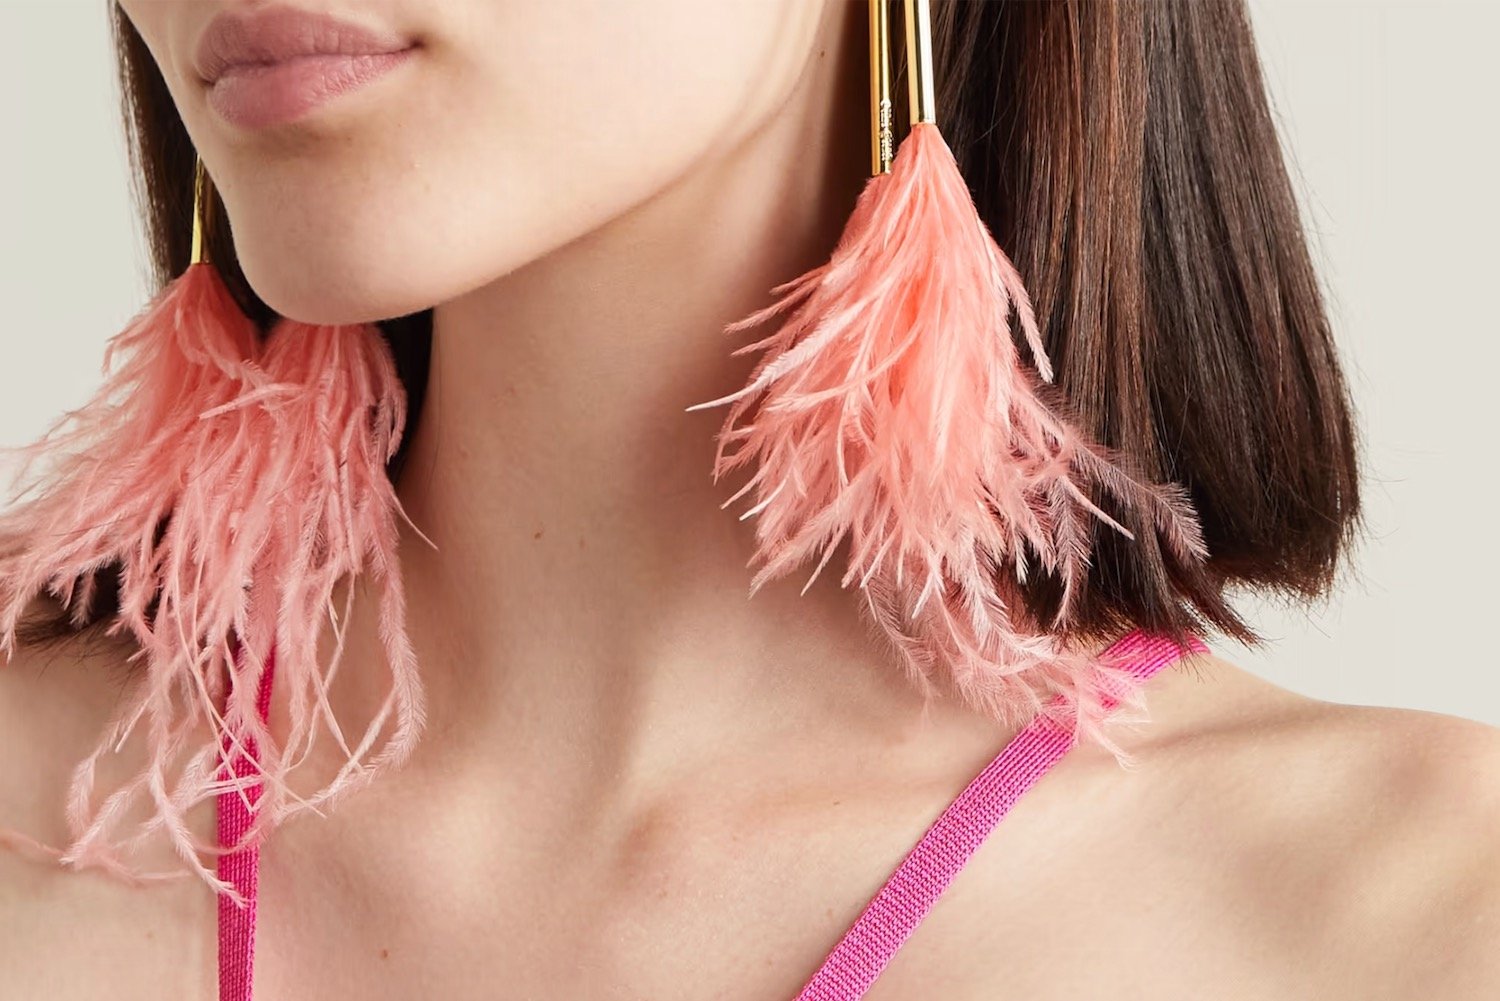 Buy Magenta Ostrich Feathers Earrings, Red Beads Fluffy Earrings, Ostrich  Feathers Earrings, Fuchsia Ostrich Feathers Earrings Online in India - Etsy